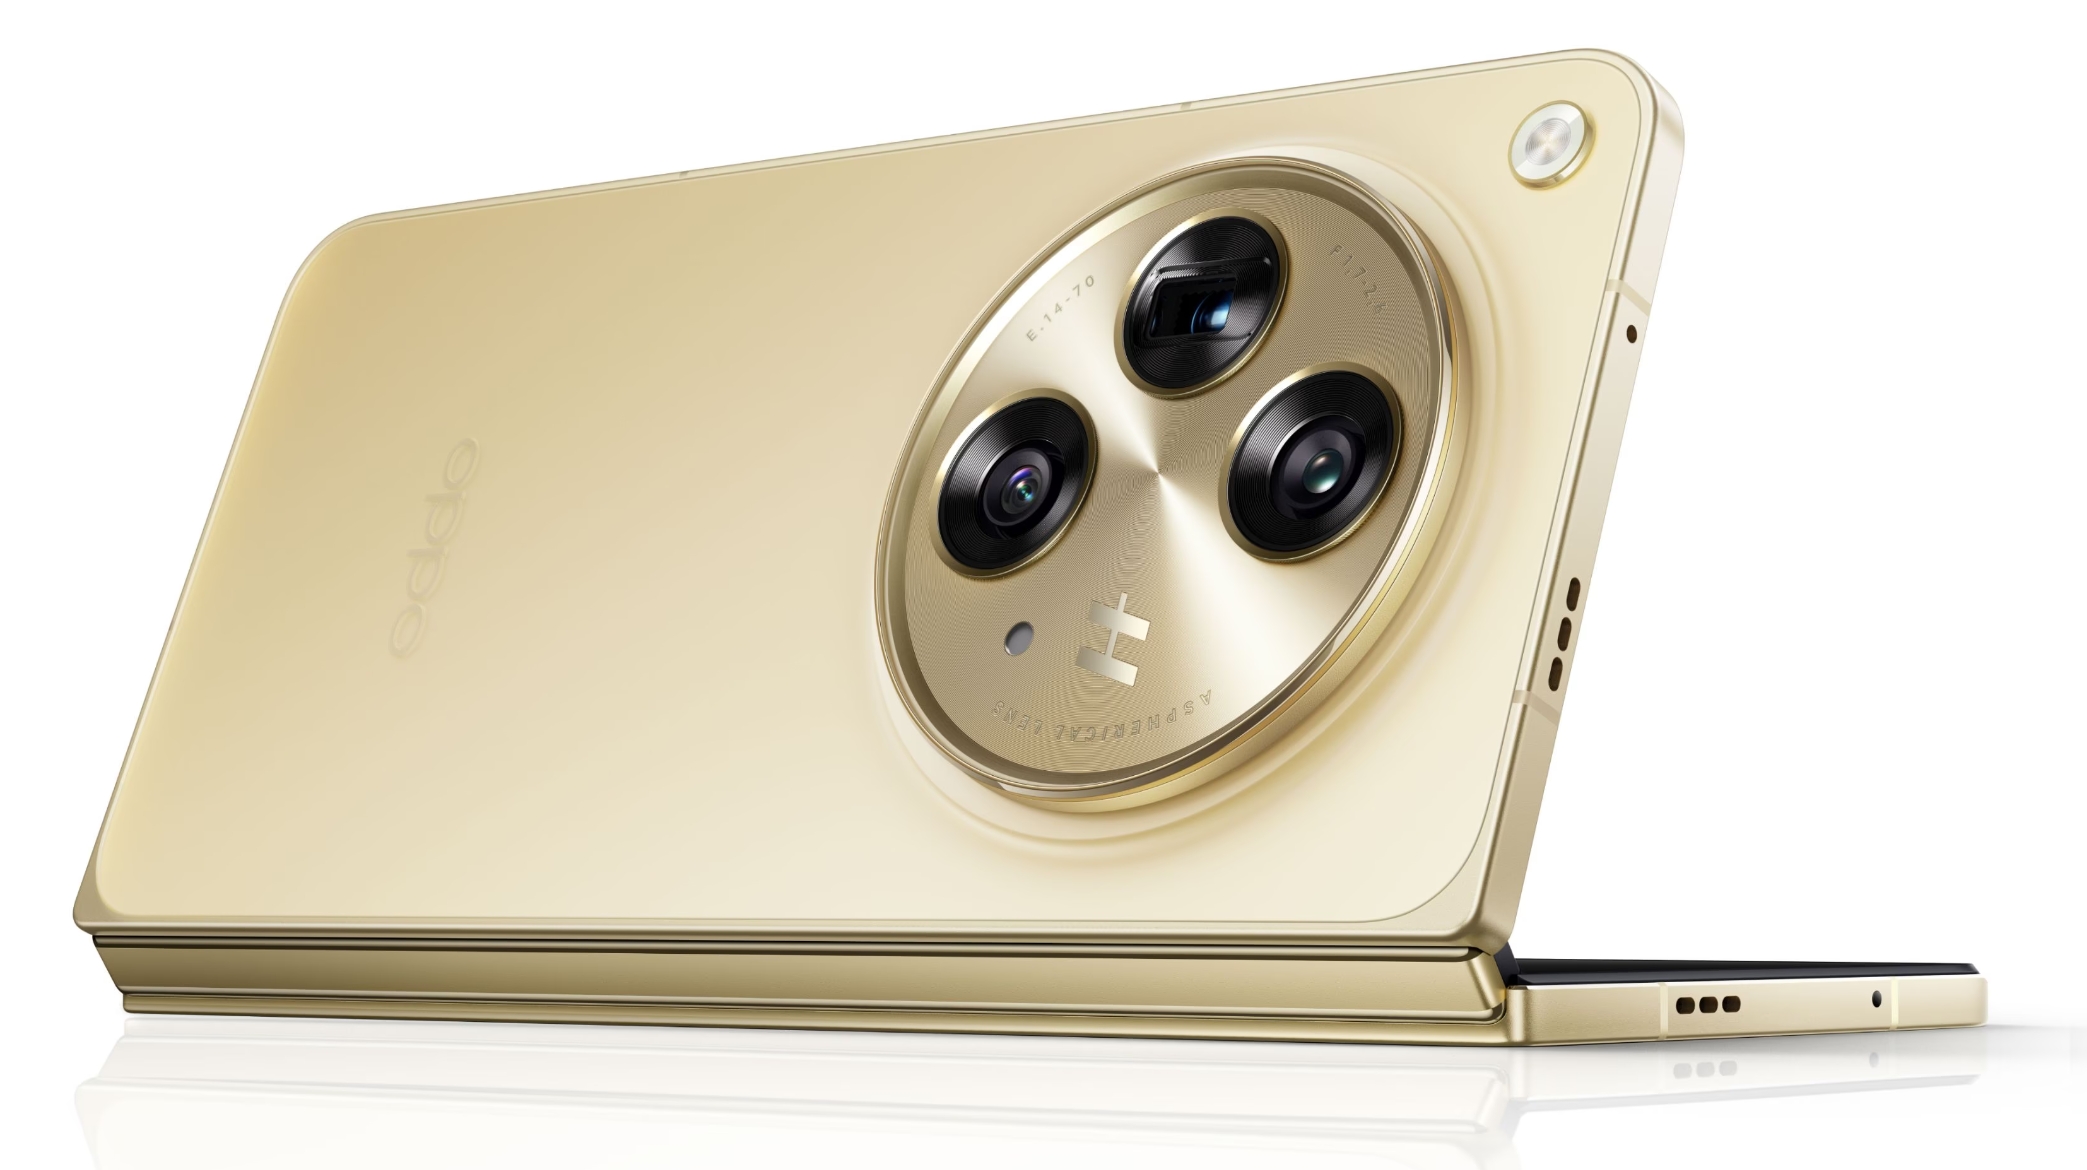 The Oppo Find N3's cameras